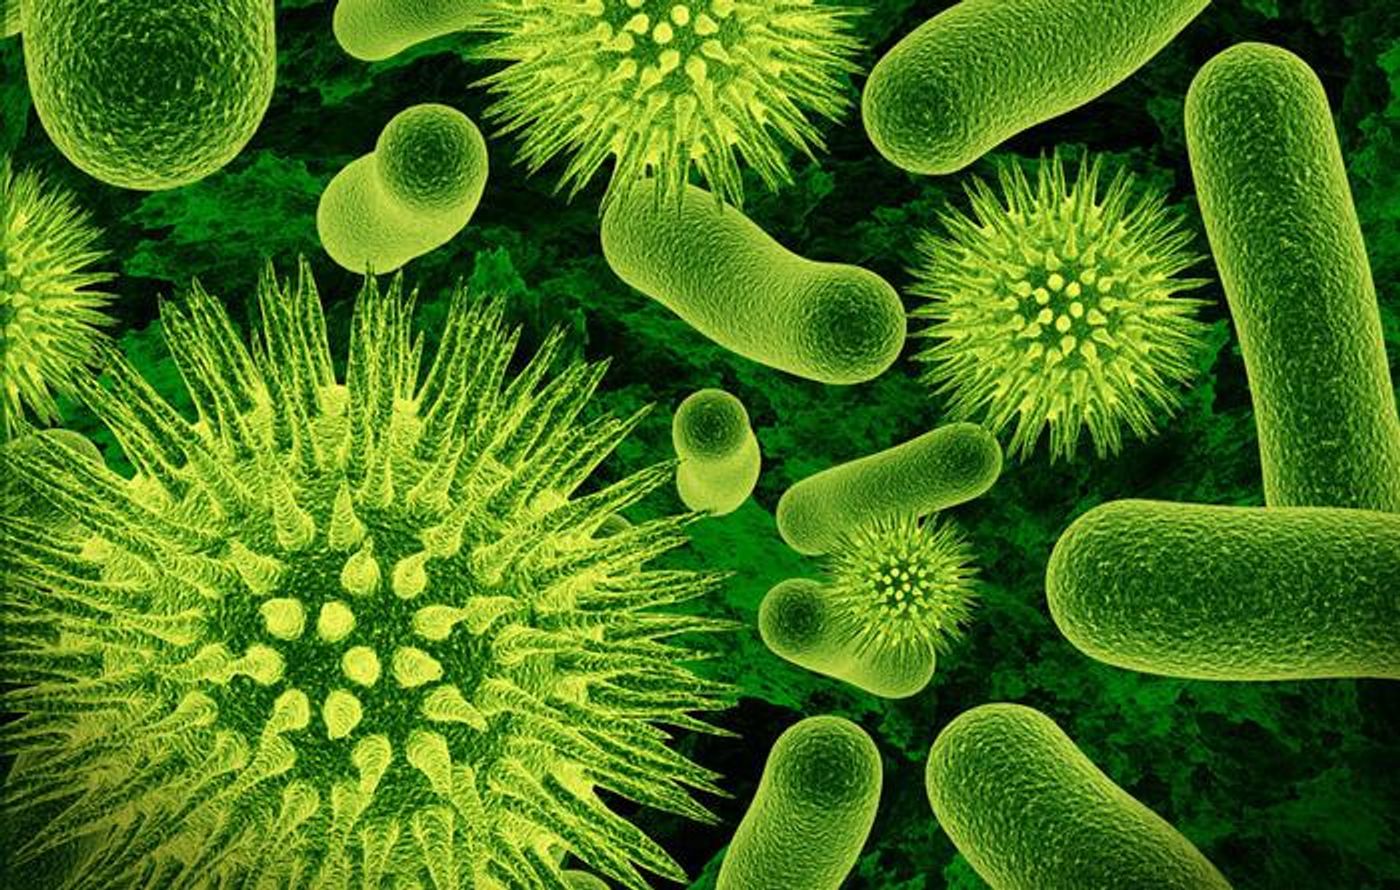 Intestinal microbes appear to predict healthy aging.